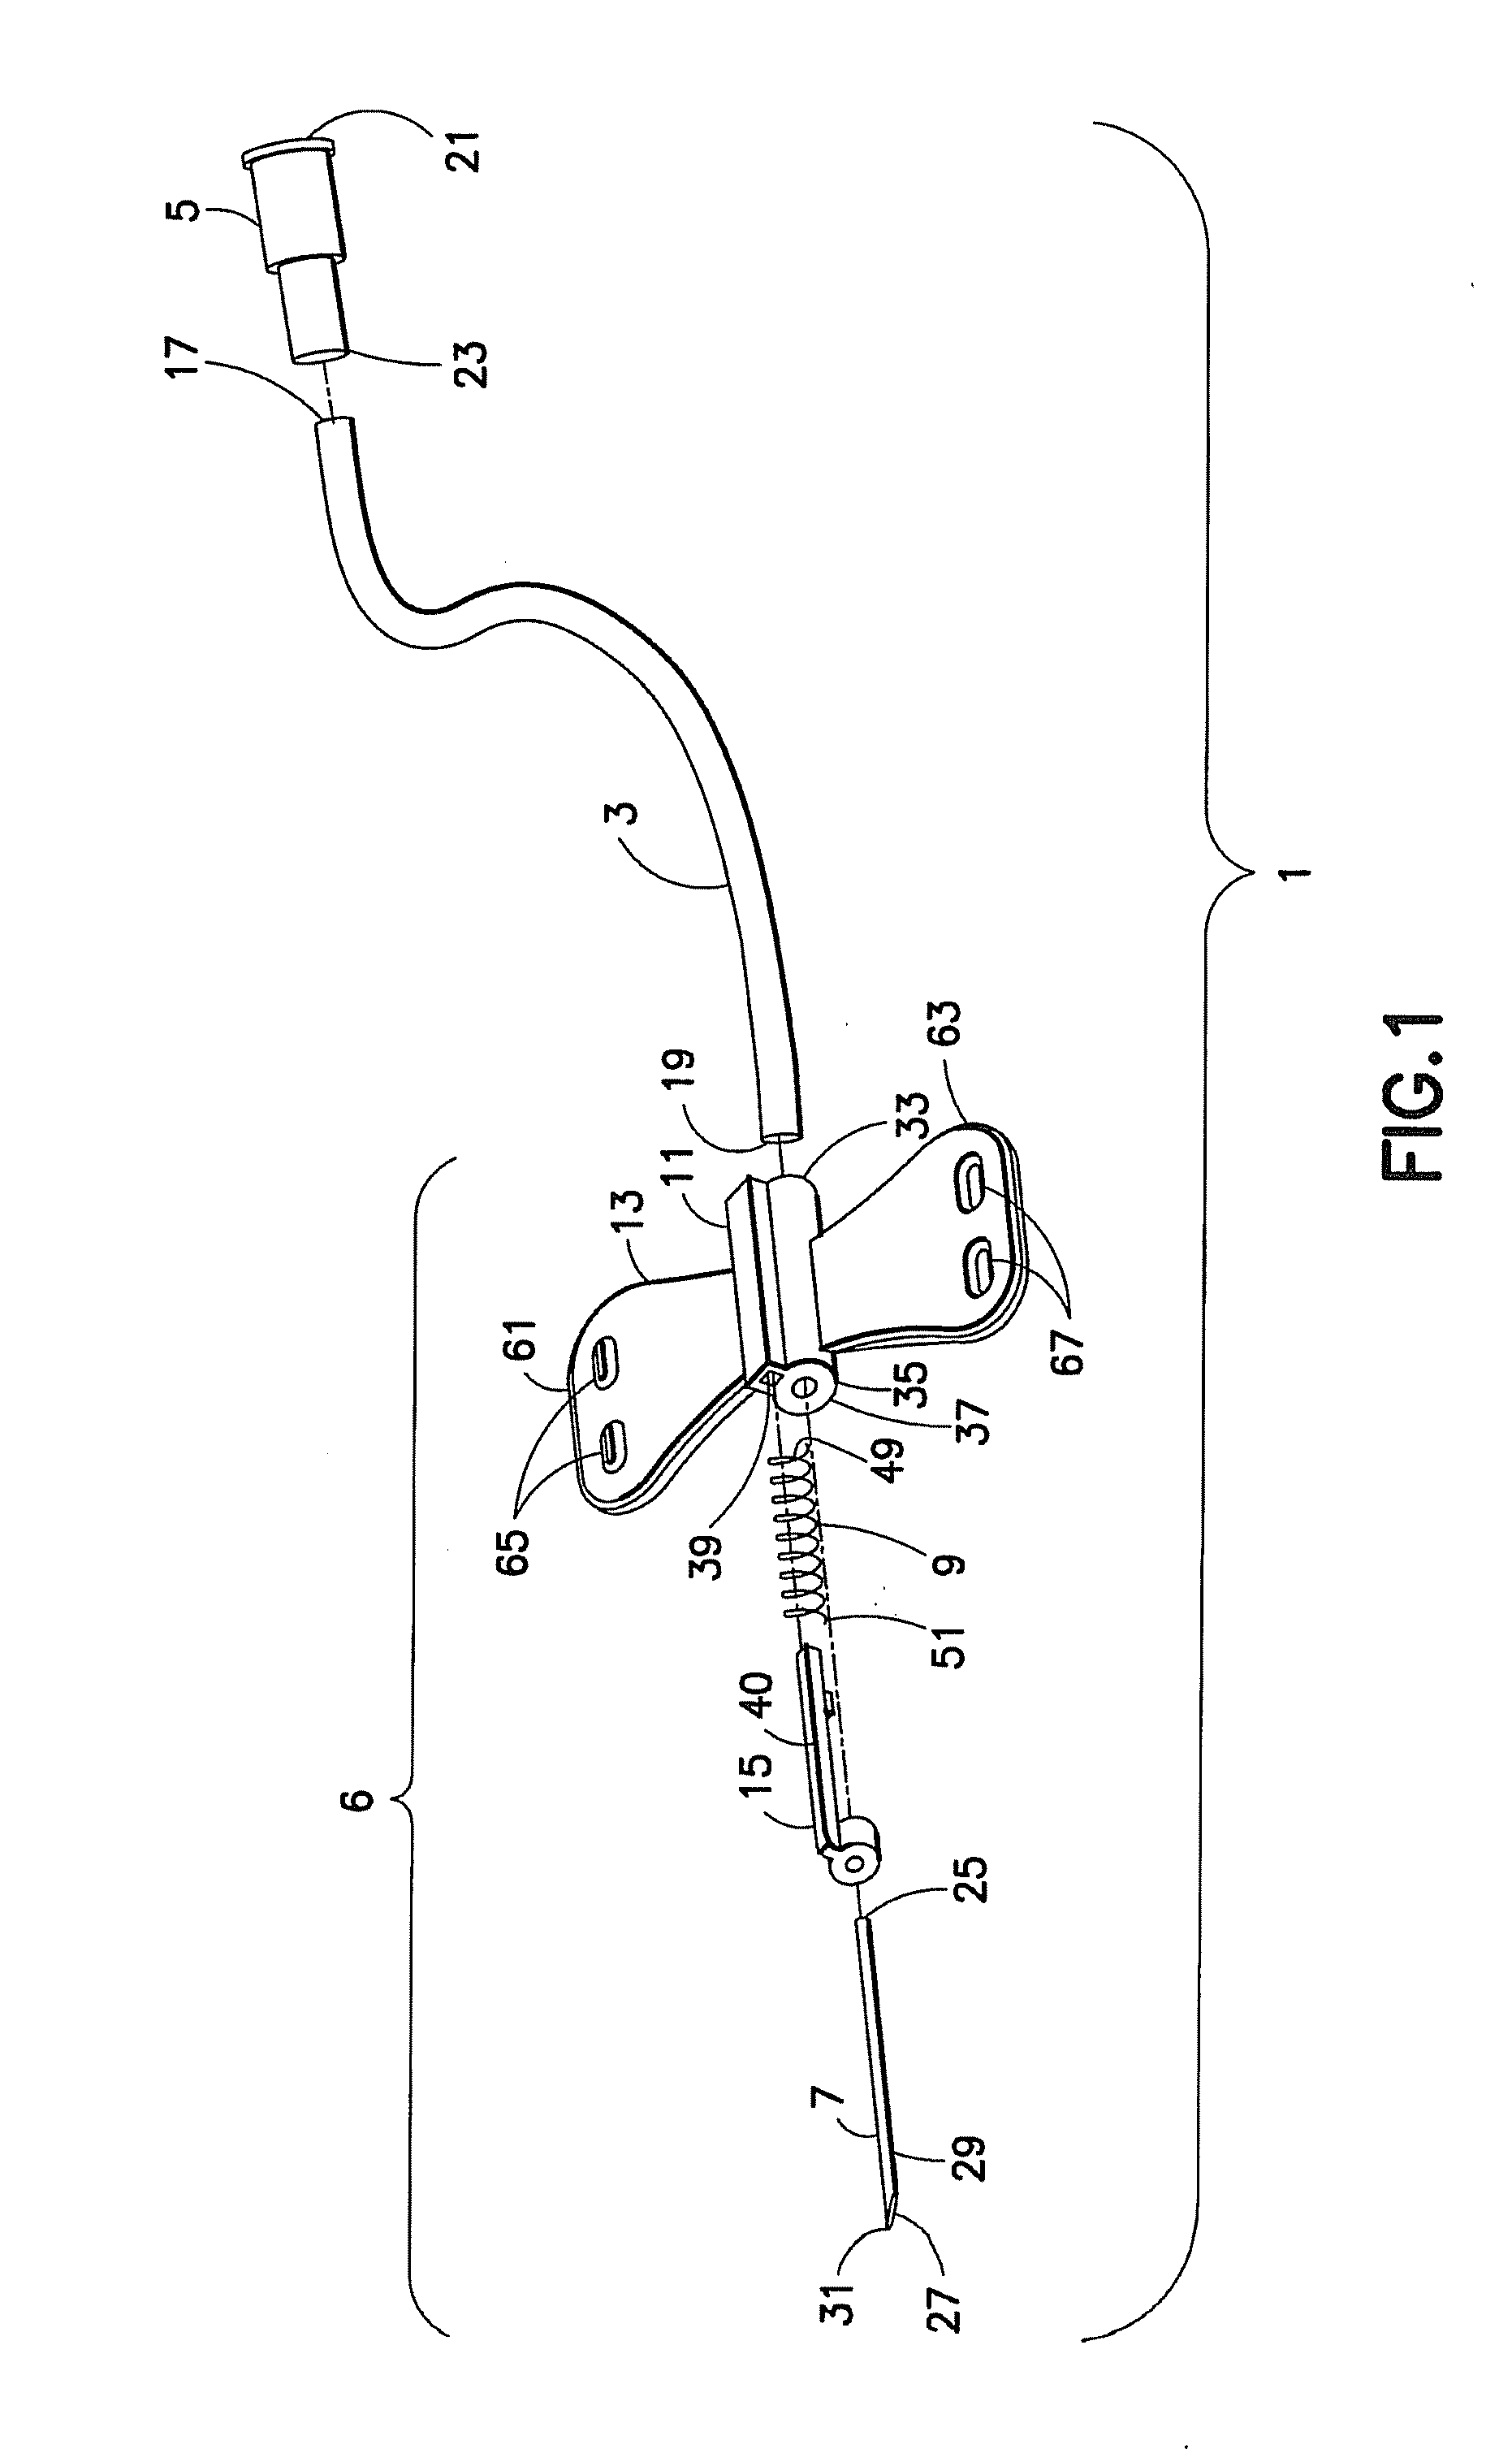 Flash Activated Passive Shielding Needle Assembly